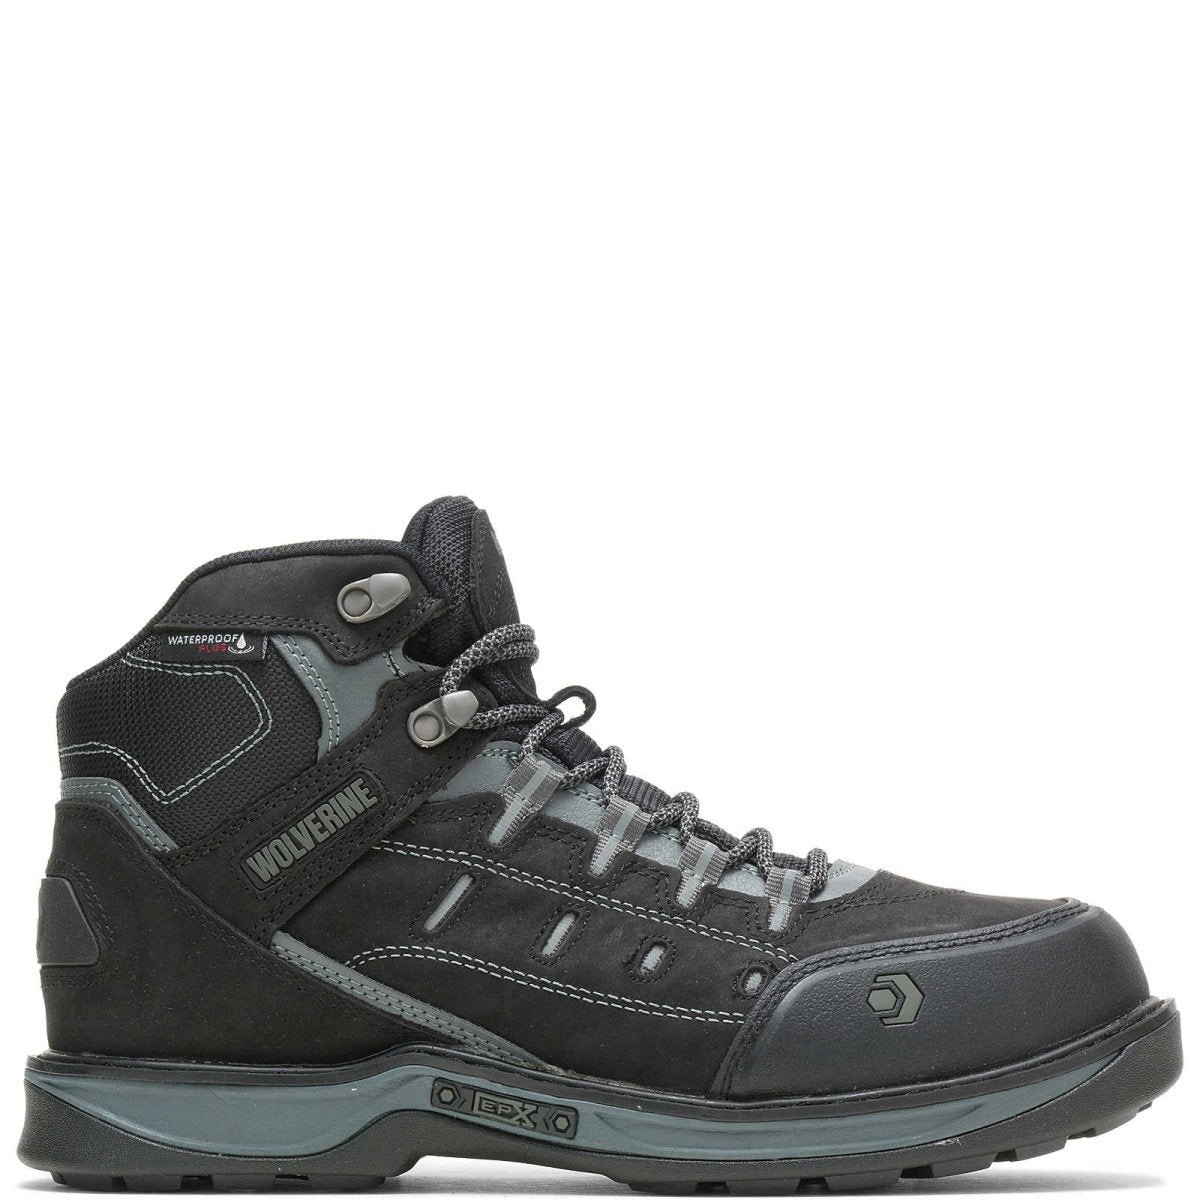 WOLVERINE EDGE LX WP MEN'S SAFETY TOE WORK BOOT (W10553) IN BLACK/GREY. - TLW Shoes